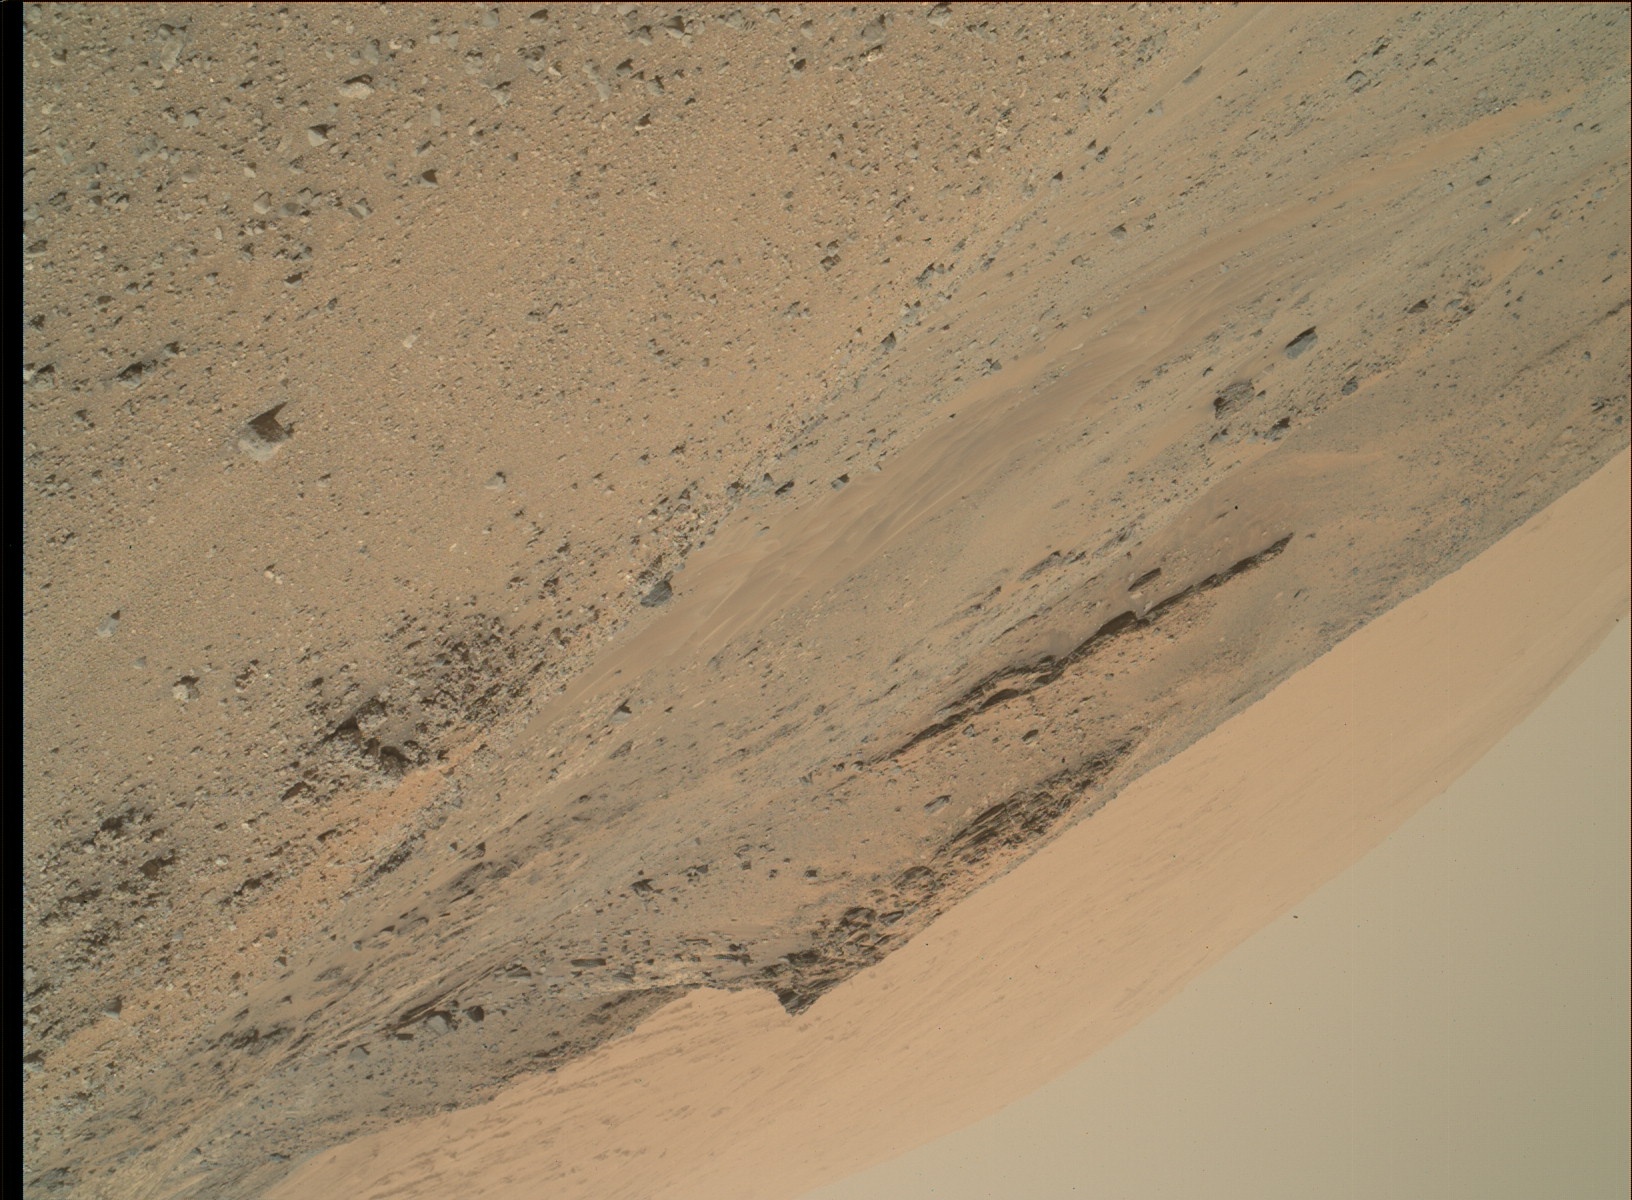 Nasa's Mars rover Curiosity acquired this image using its Mars Hand Lens Imager (MAHLI) on Sol 960